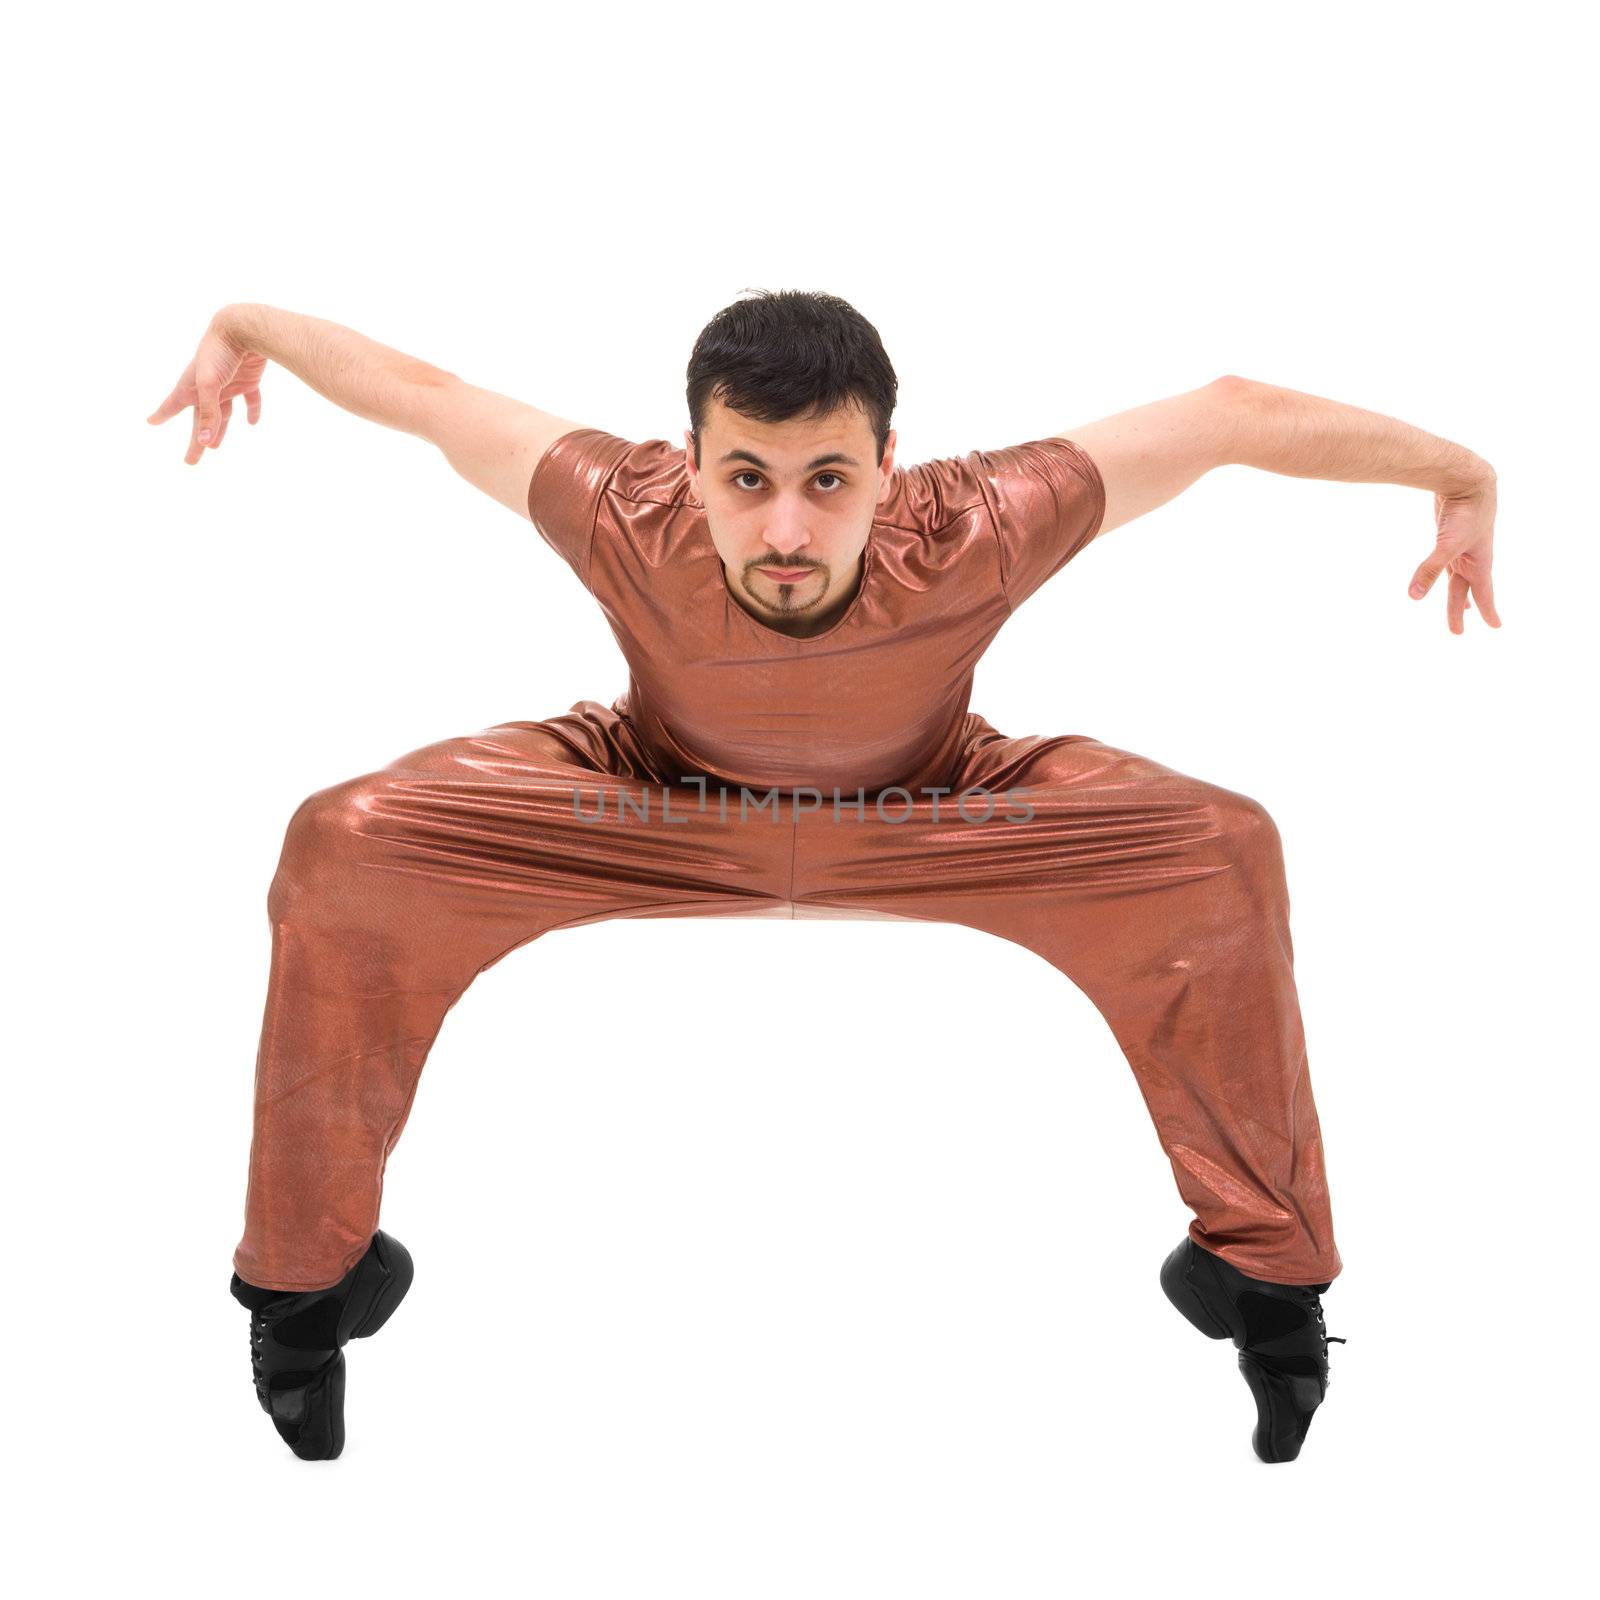 modern dancer showing some movements against isolated white background